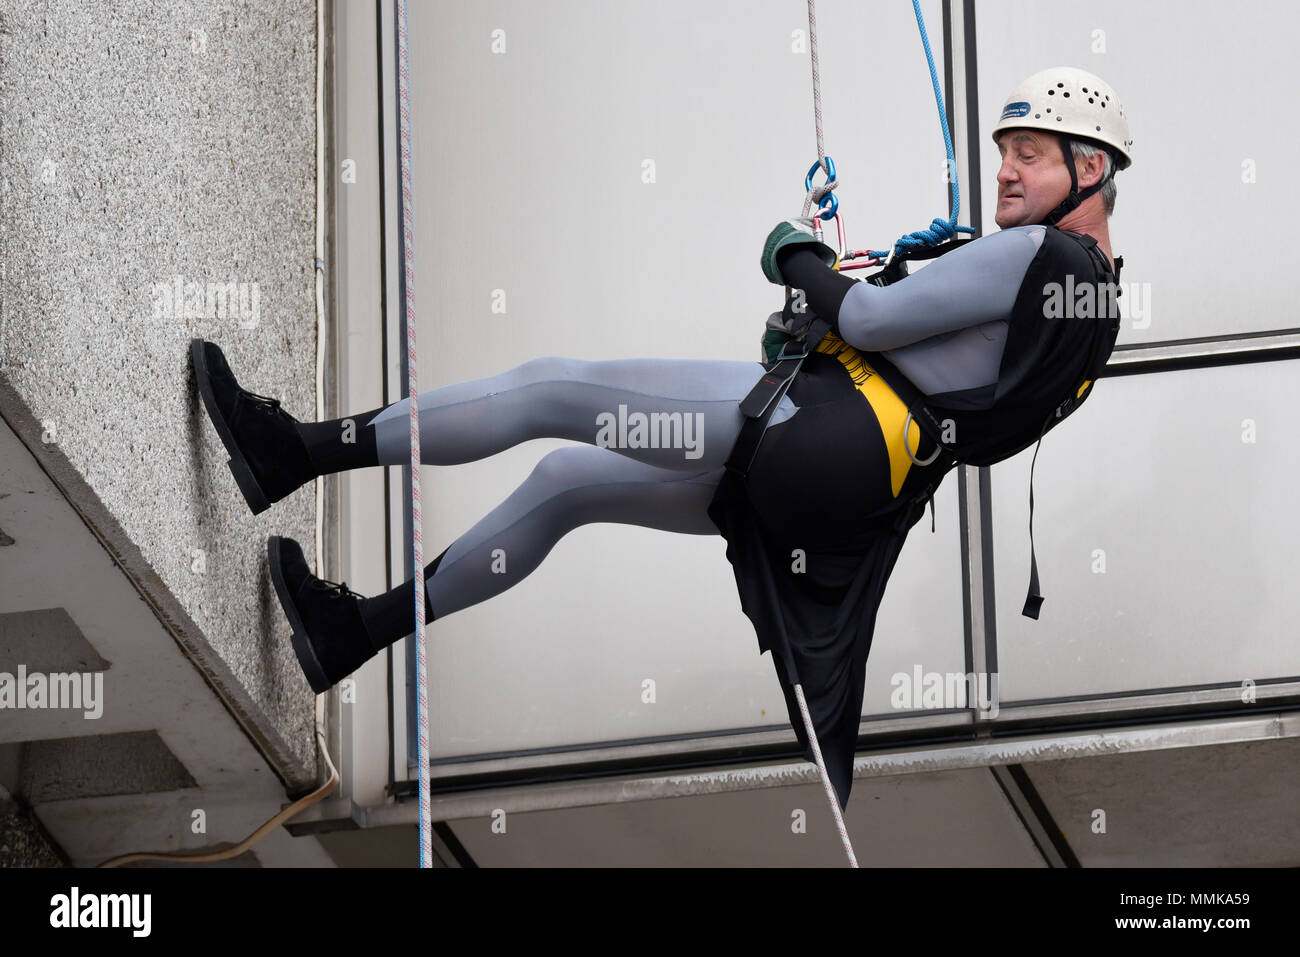 Volunteers are abseiling down the side of Southend Hospital’s 154ft tower block to raise money for charities, with a focus on wards and departments of the hospital. Batman costume Stock Photo